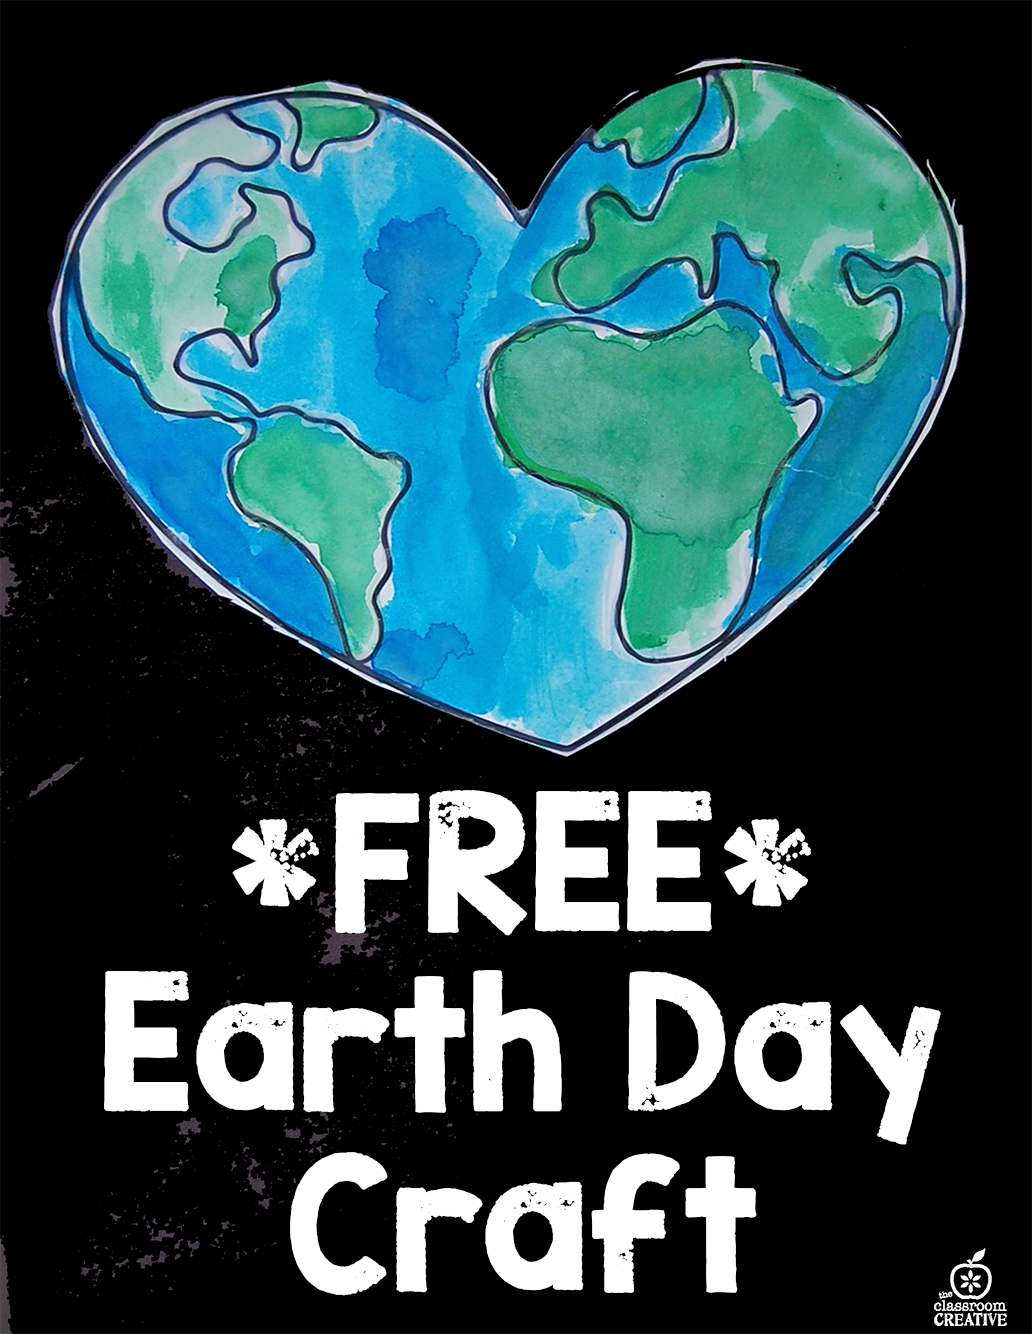 Love and save earth day agitation placards set Vector Image